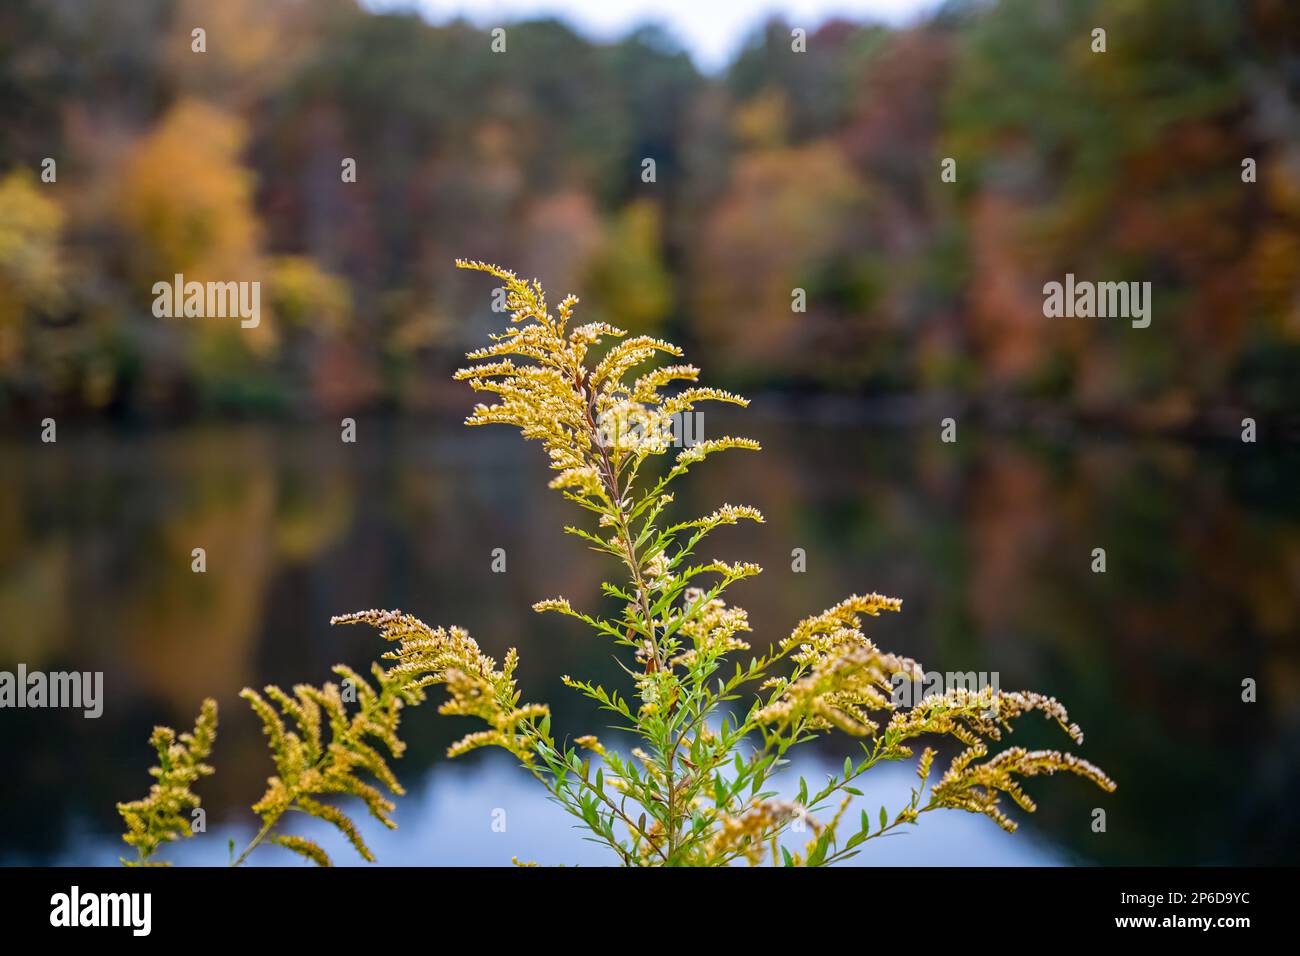 A vibrant giant goldenrod plant growing near a serene body of water Stock Photo